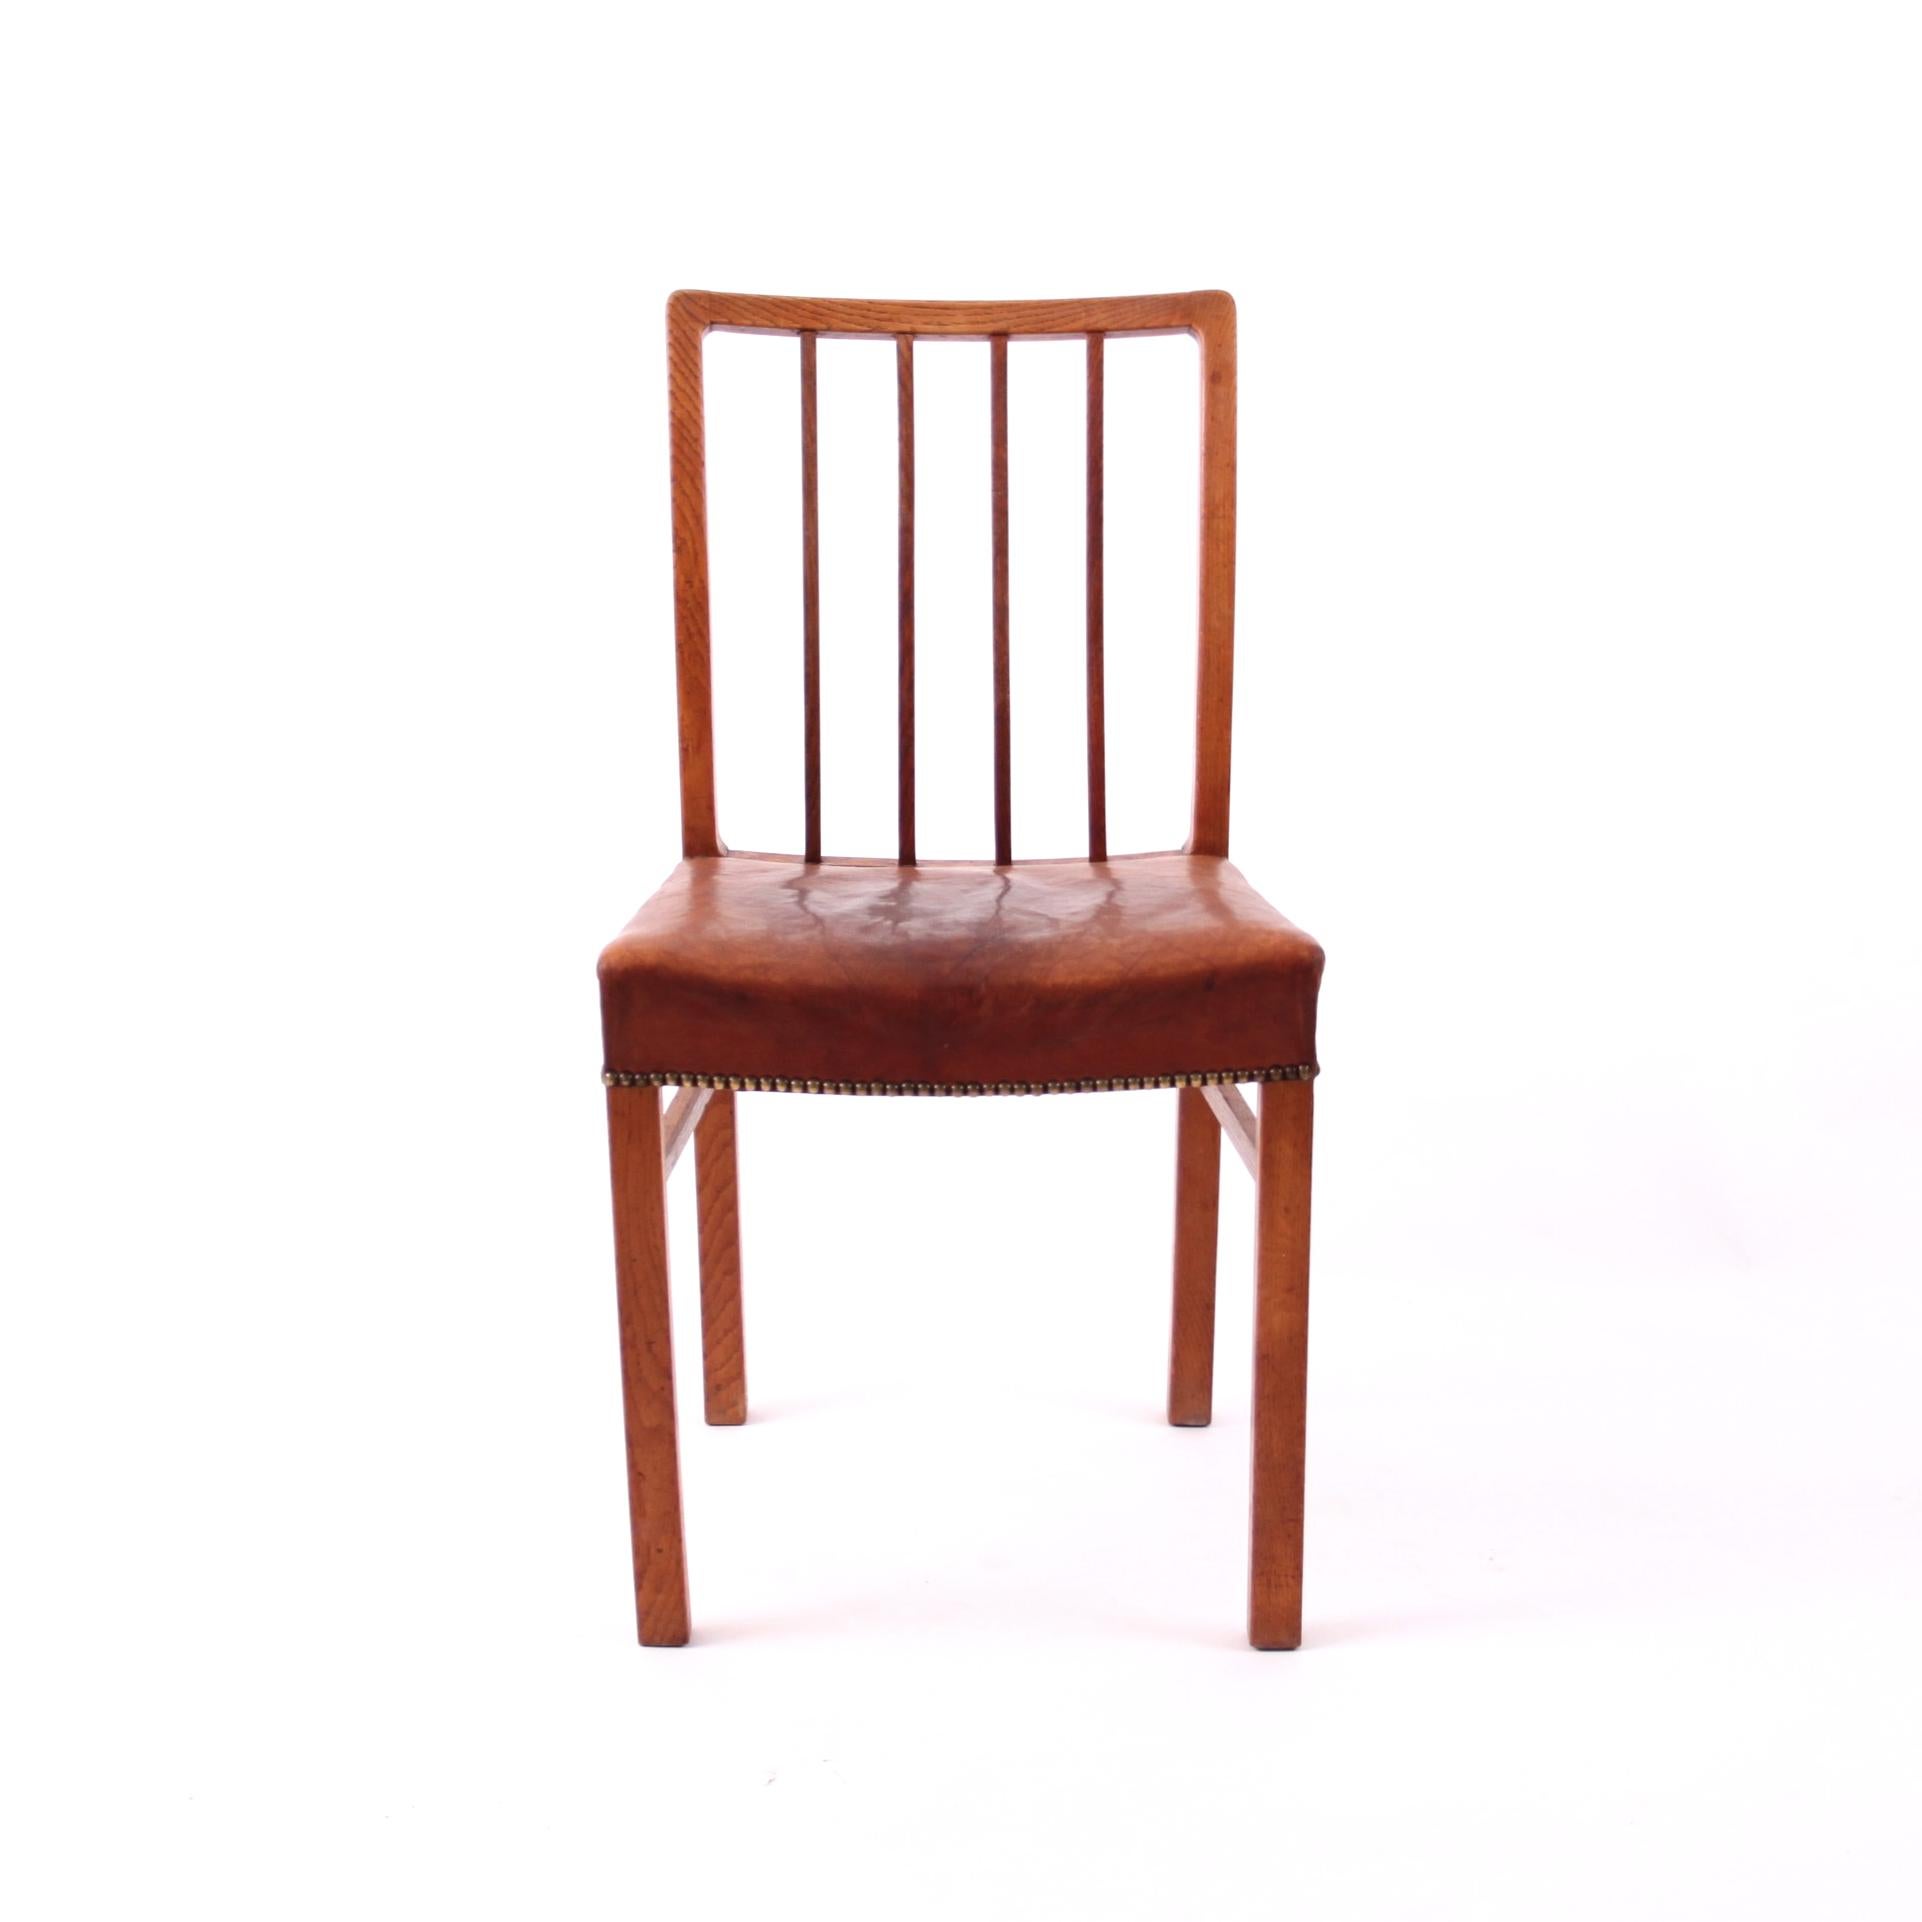 JACOB KJÆR   -   SCANDINAVIAN MODERN

A beautiful set of 6 dining chairs by designer and cabinetmaker Jacob Kjær, Denmark 1930s.

The frame is made of oak with curved details. The seats are with the original Niger leather from 1930s which gives the